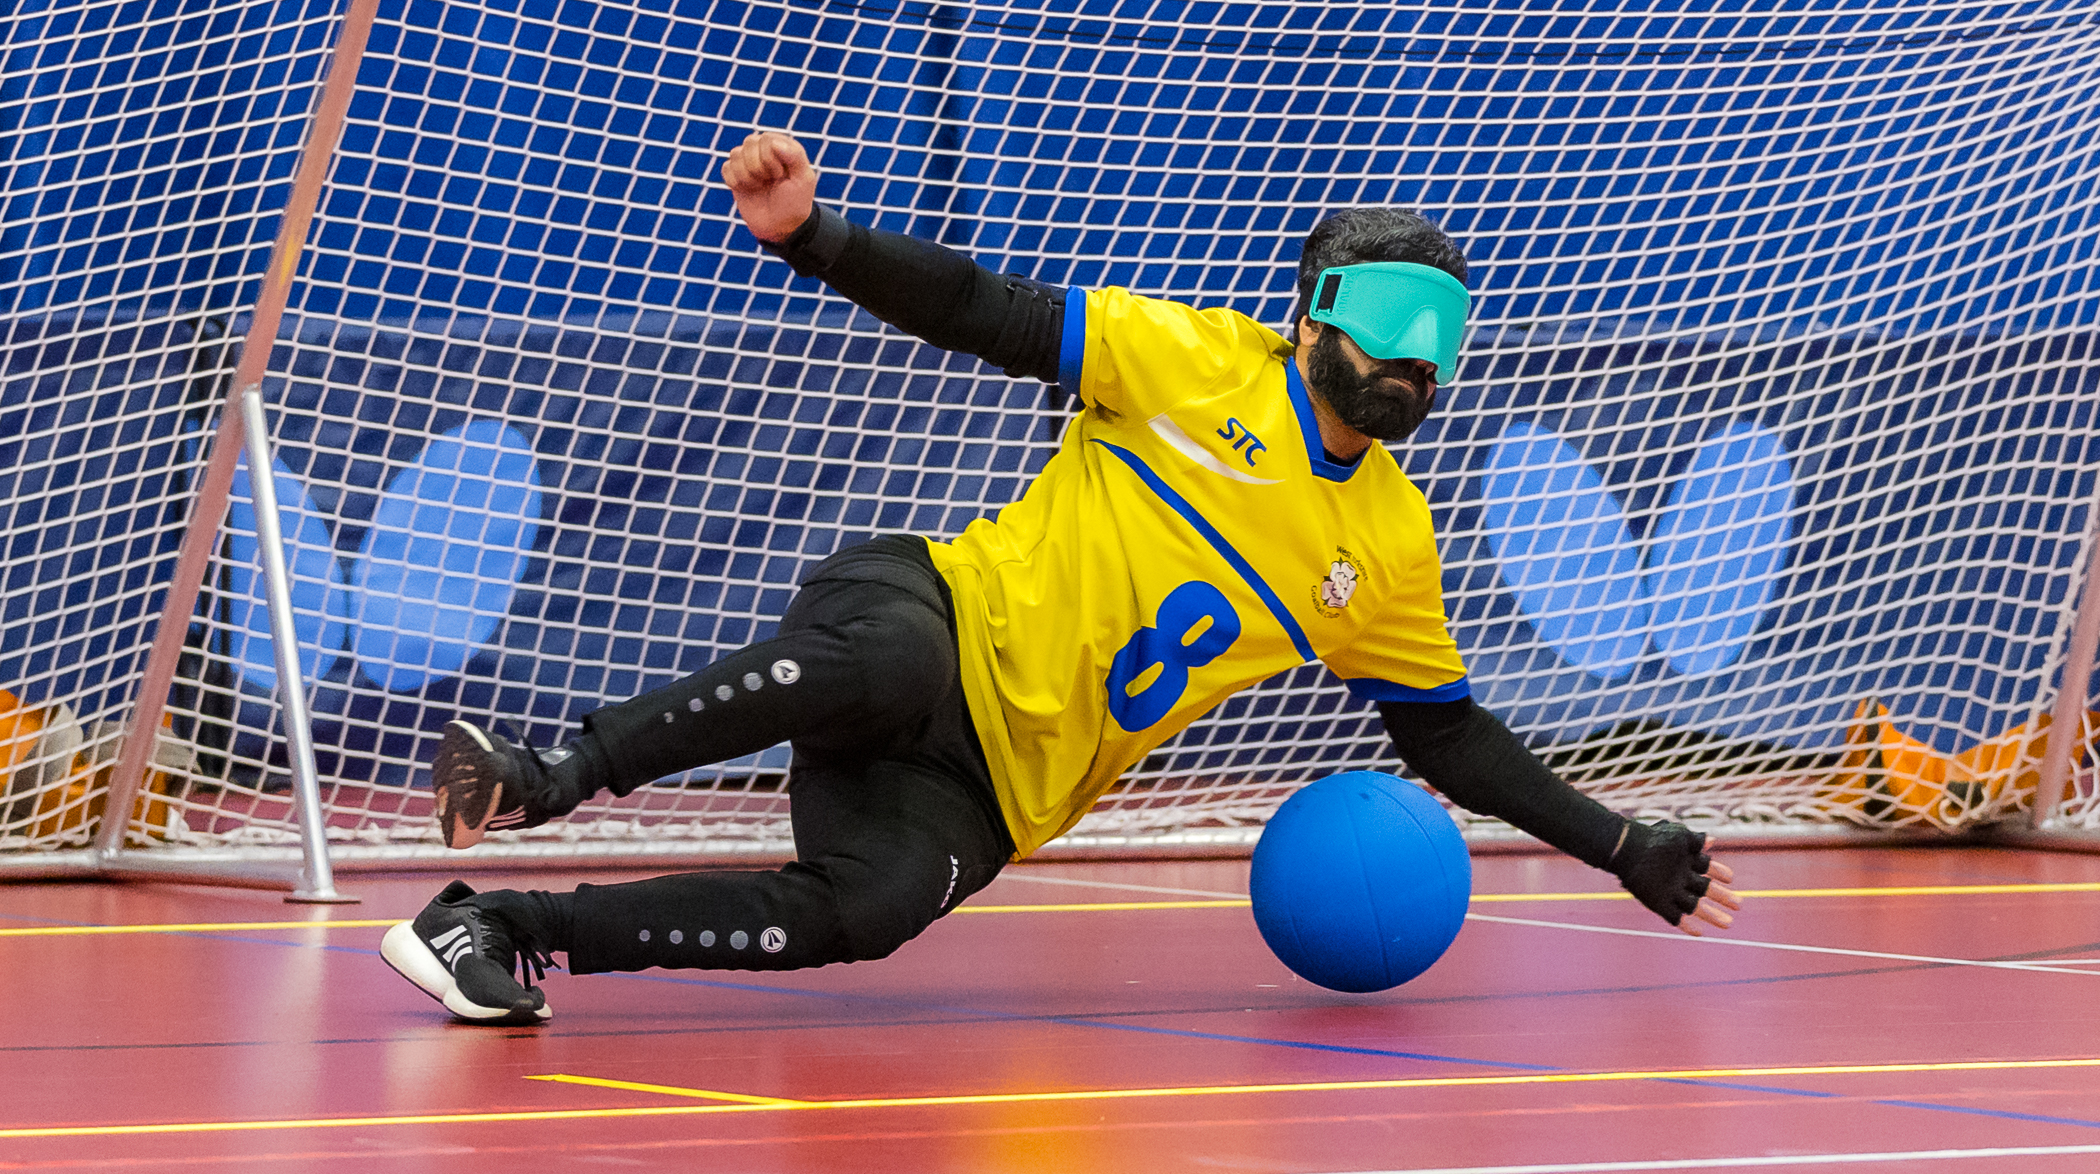 A male West Yorkshire Goalball player dives to his left to defend a goal attempt. He is wearing a yellow shirt and turquoise eyeshades